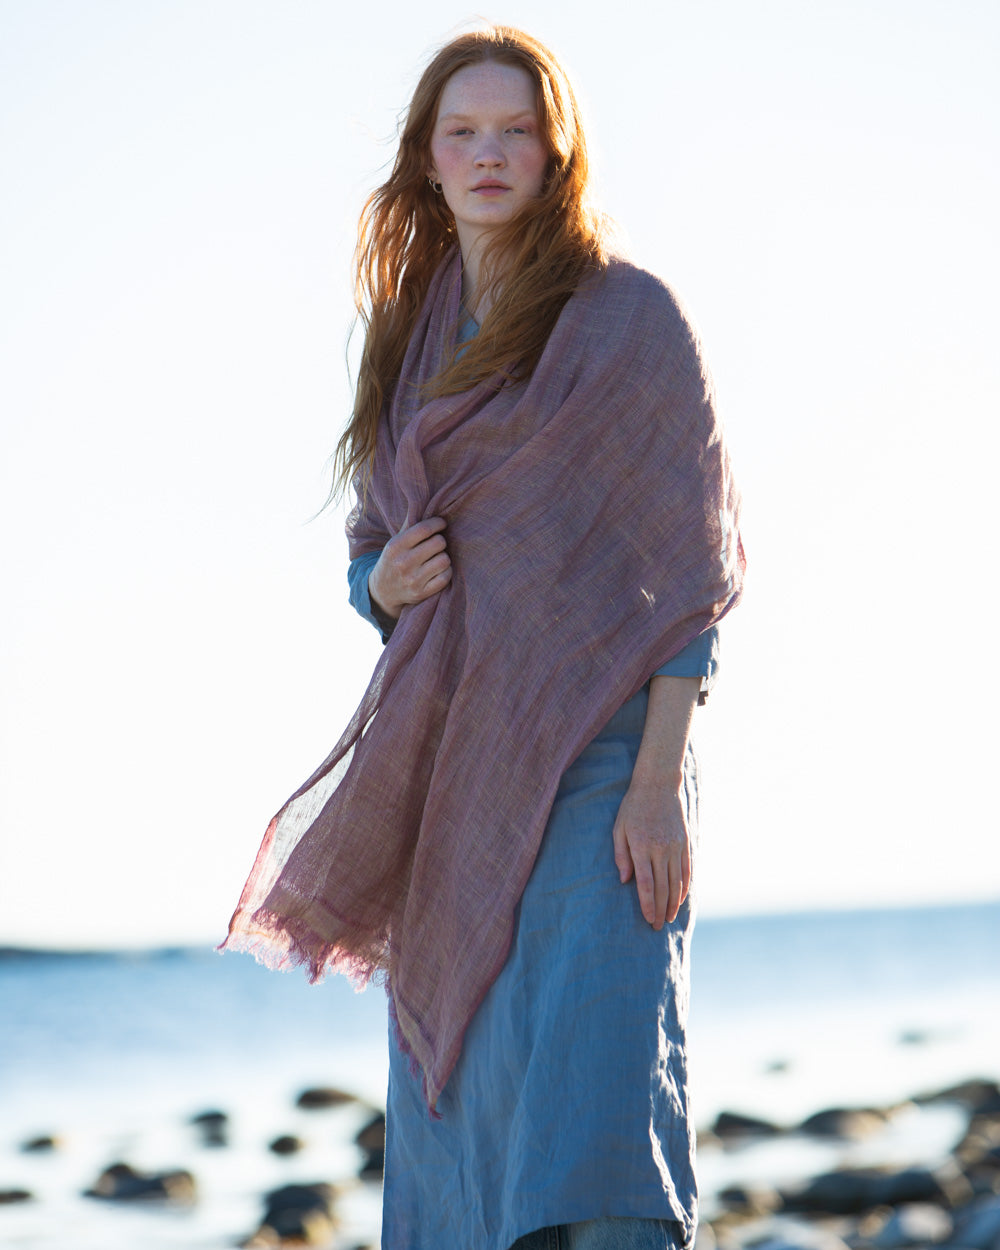 Large, Hand-woven Linen Shawl